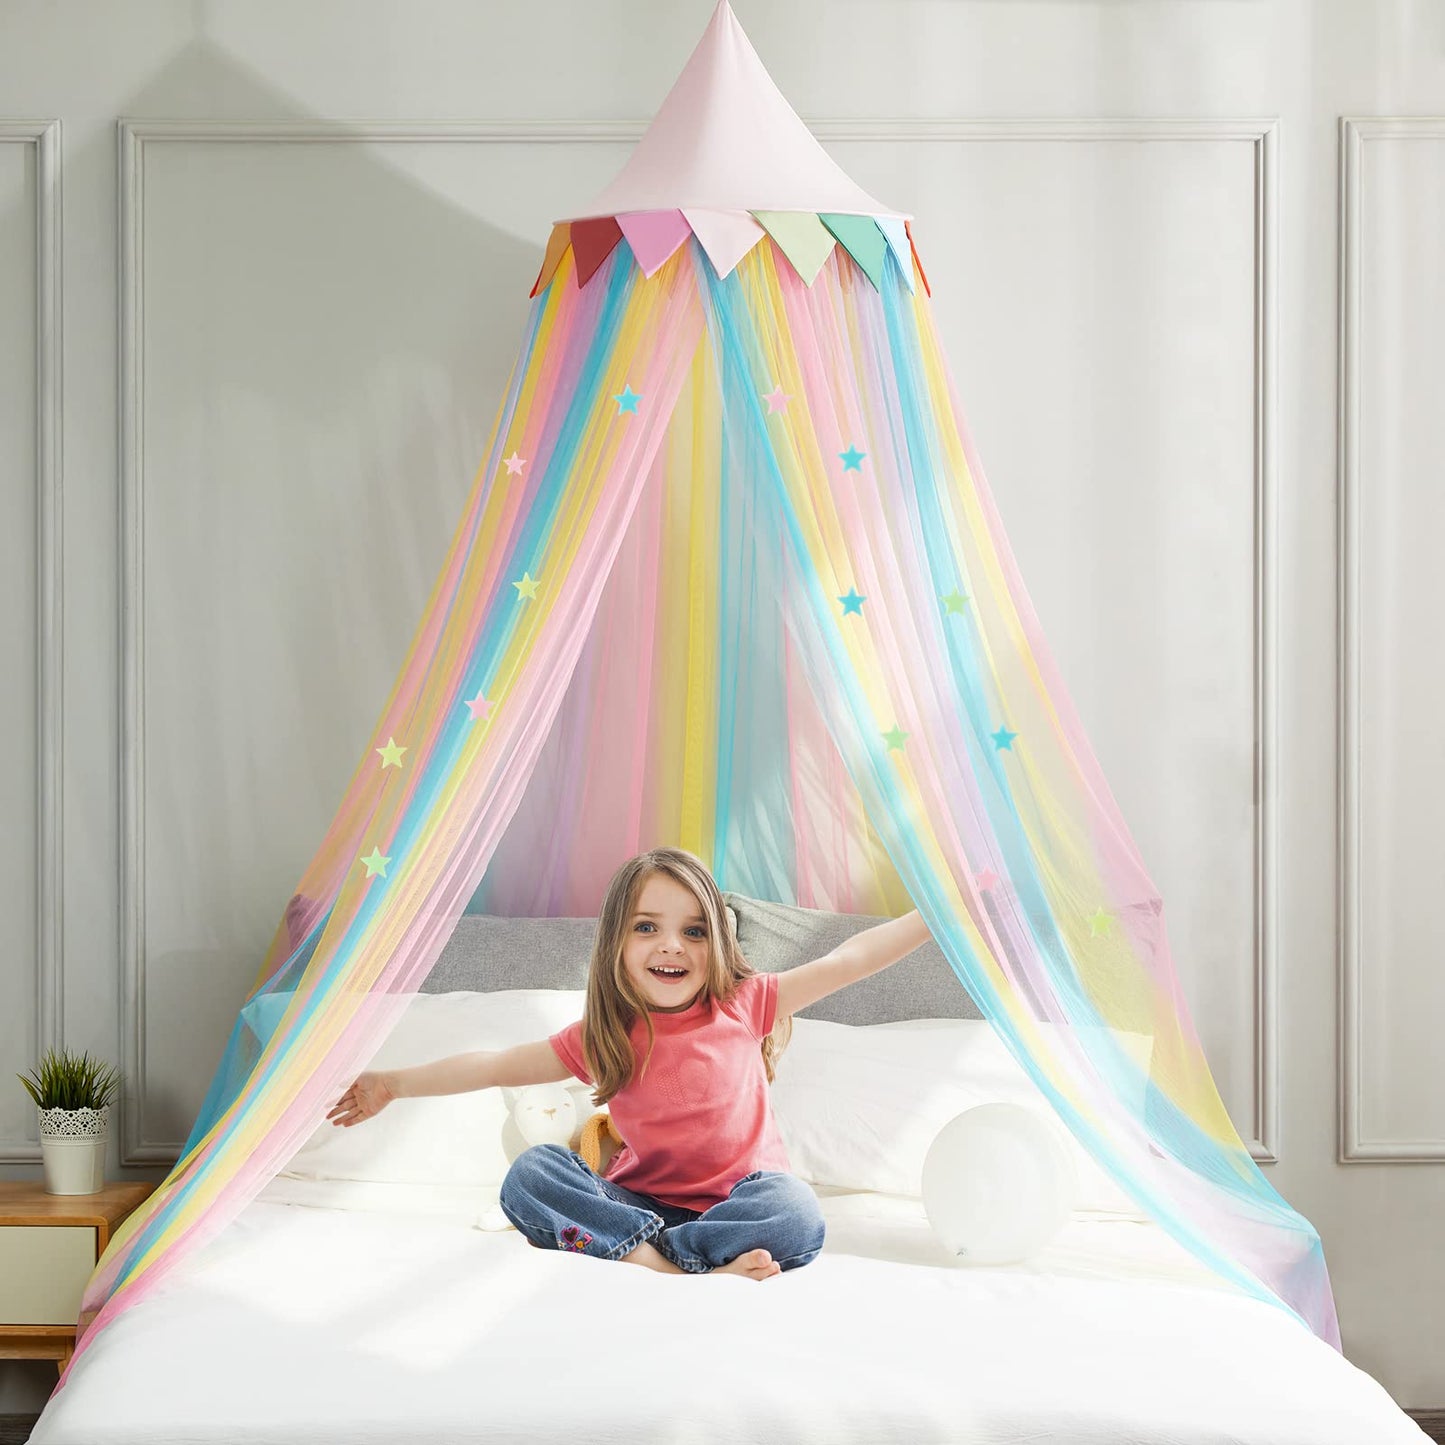 MOOZHEALTH Bed Canopy for Girls Kids Princess Round Dome Dreamy Hanging Net Canopy Rainbow Bright Bed Canopy for Girls Kids Bedroom Decoration Children Reading Nook Play Tent Canopy